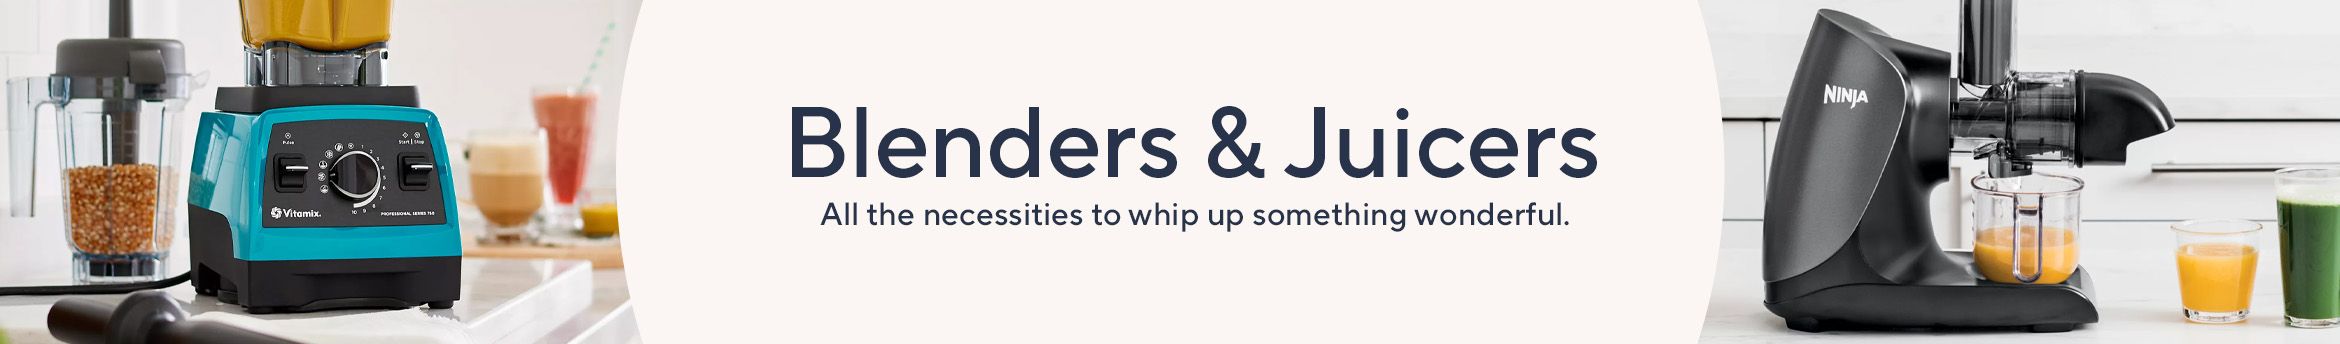 Blender & Juicers- All the necessities to whip up something wonderful